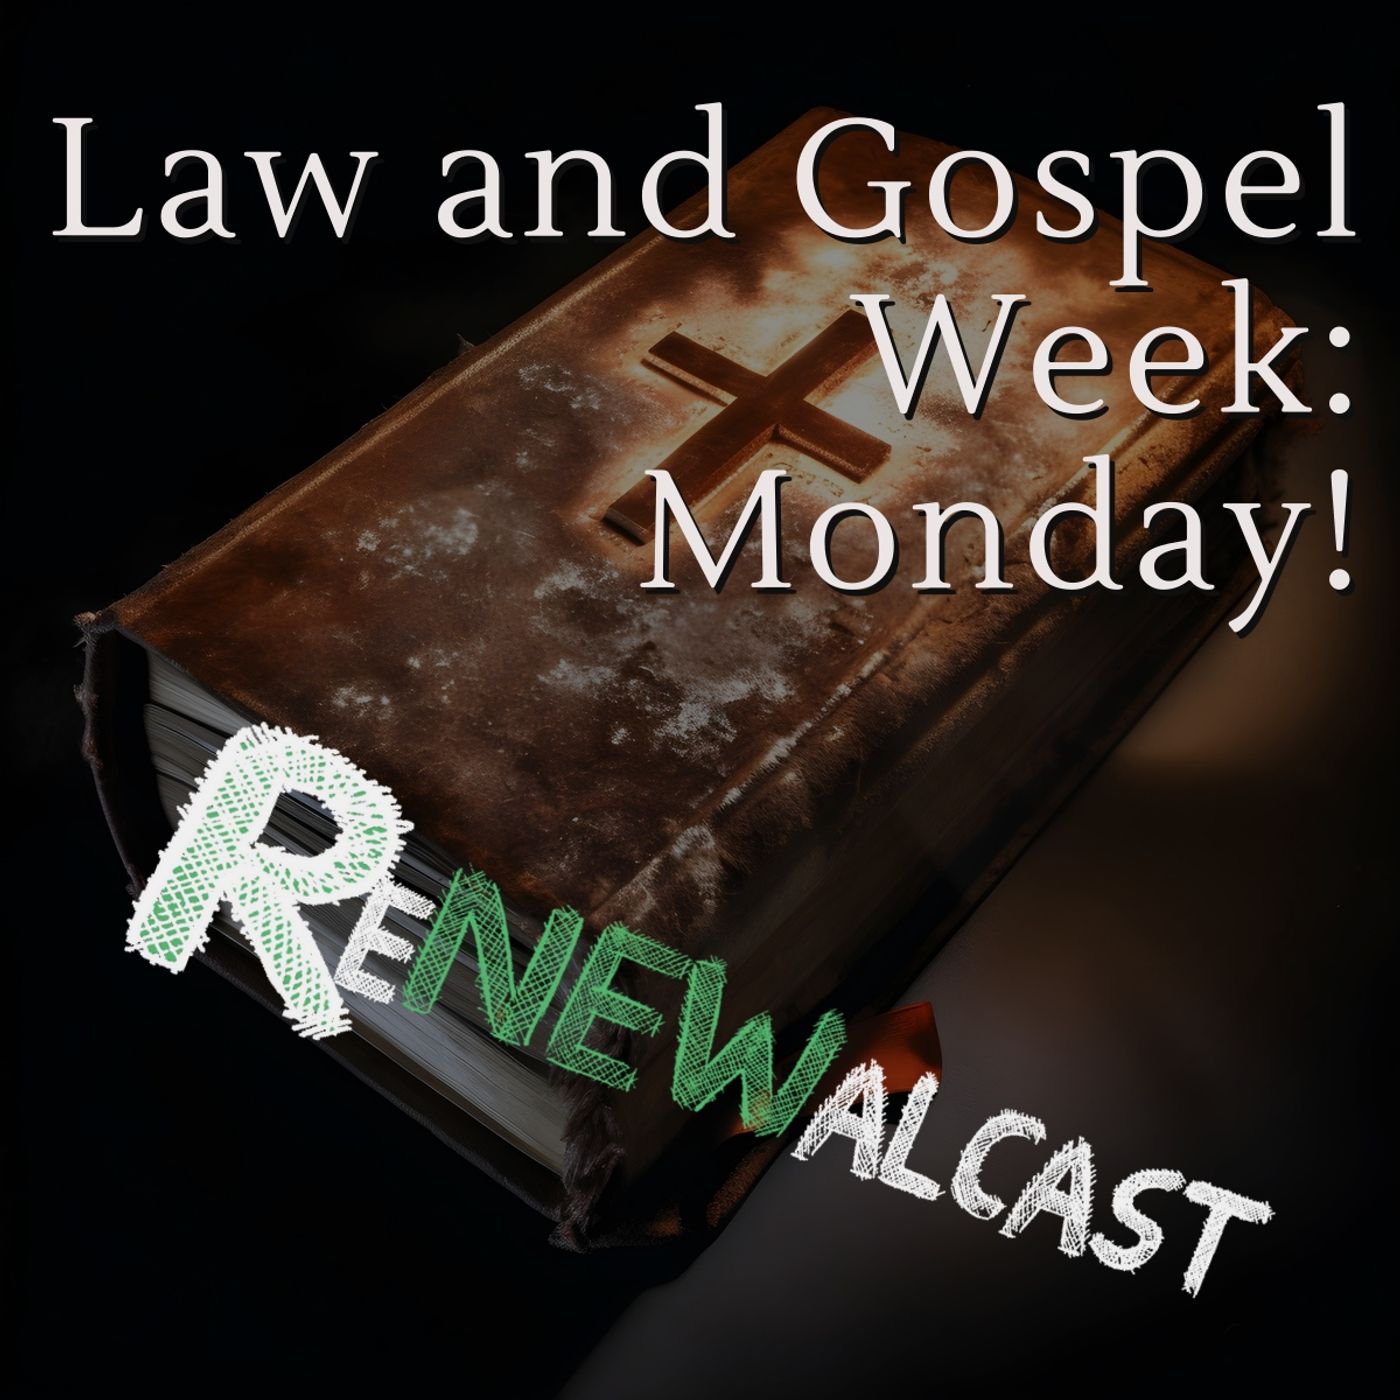 Law and Gospel week: Monday!